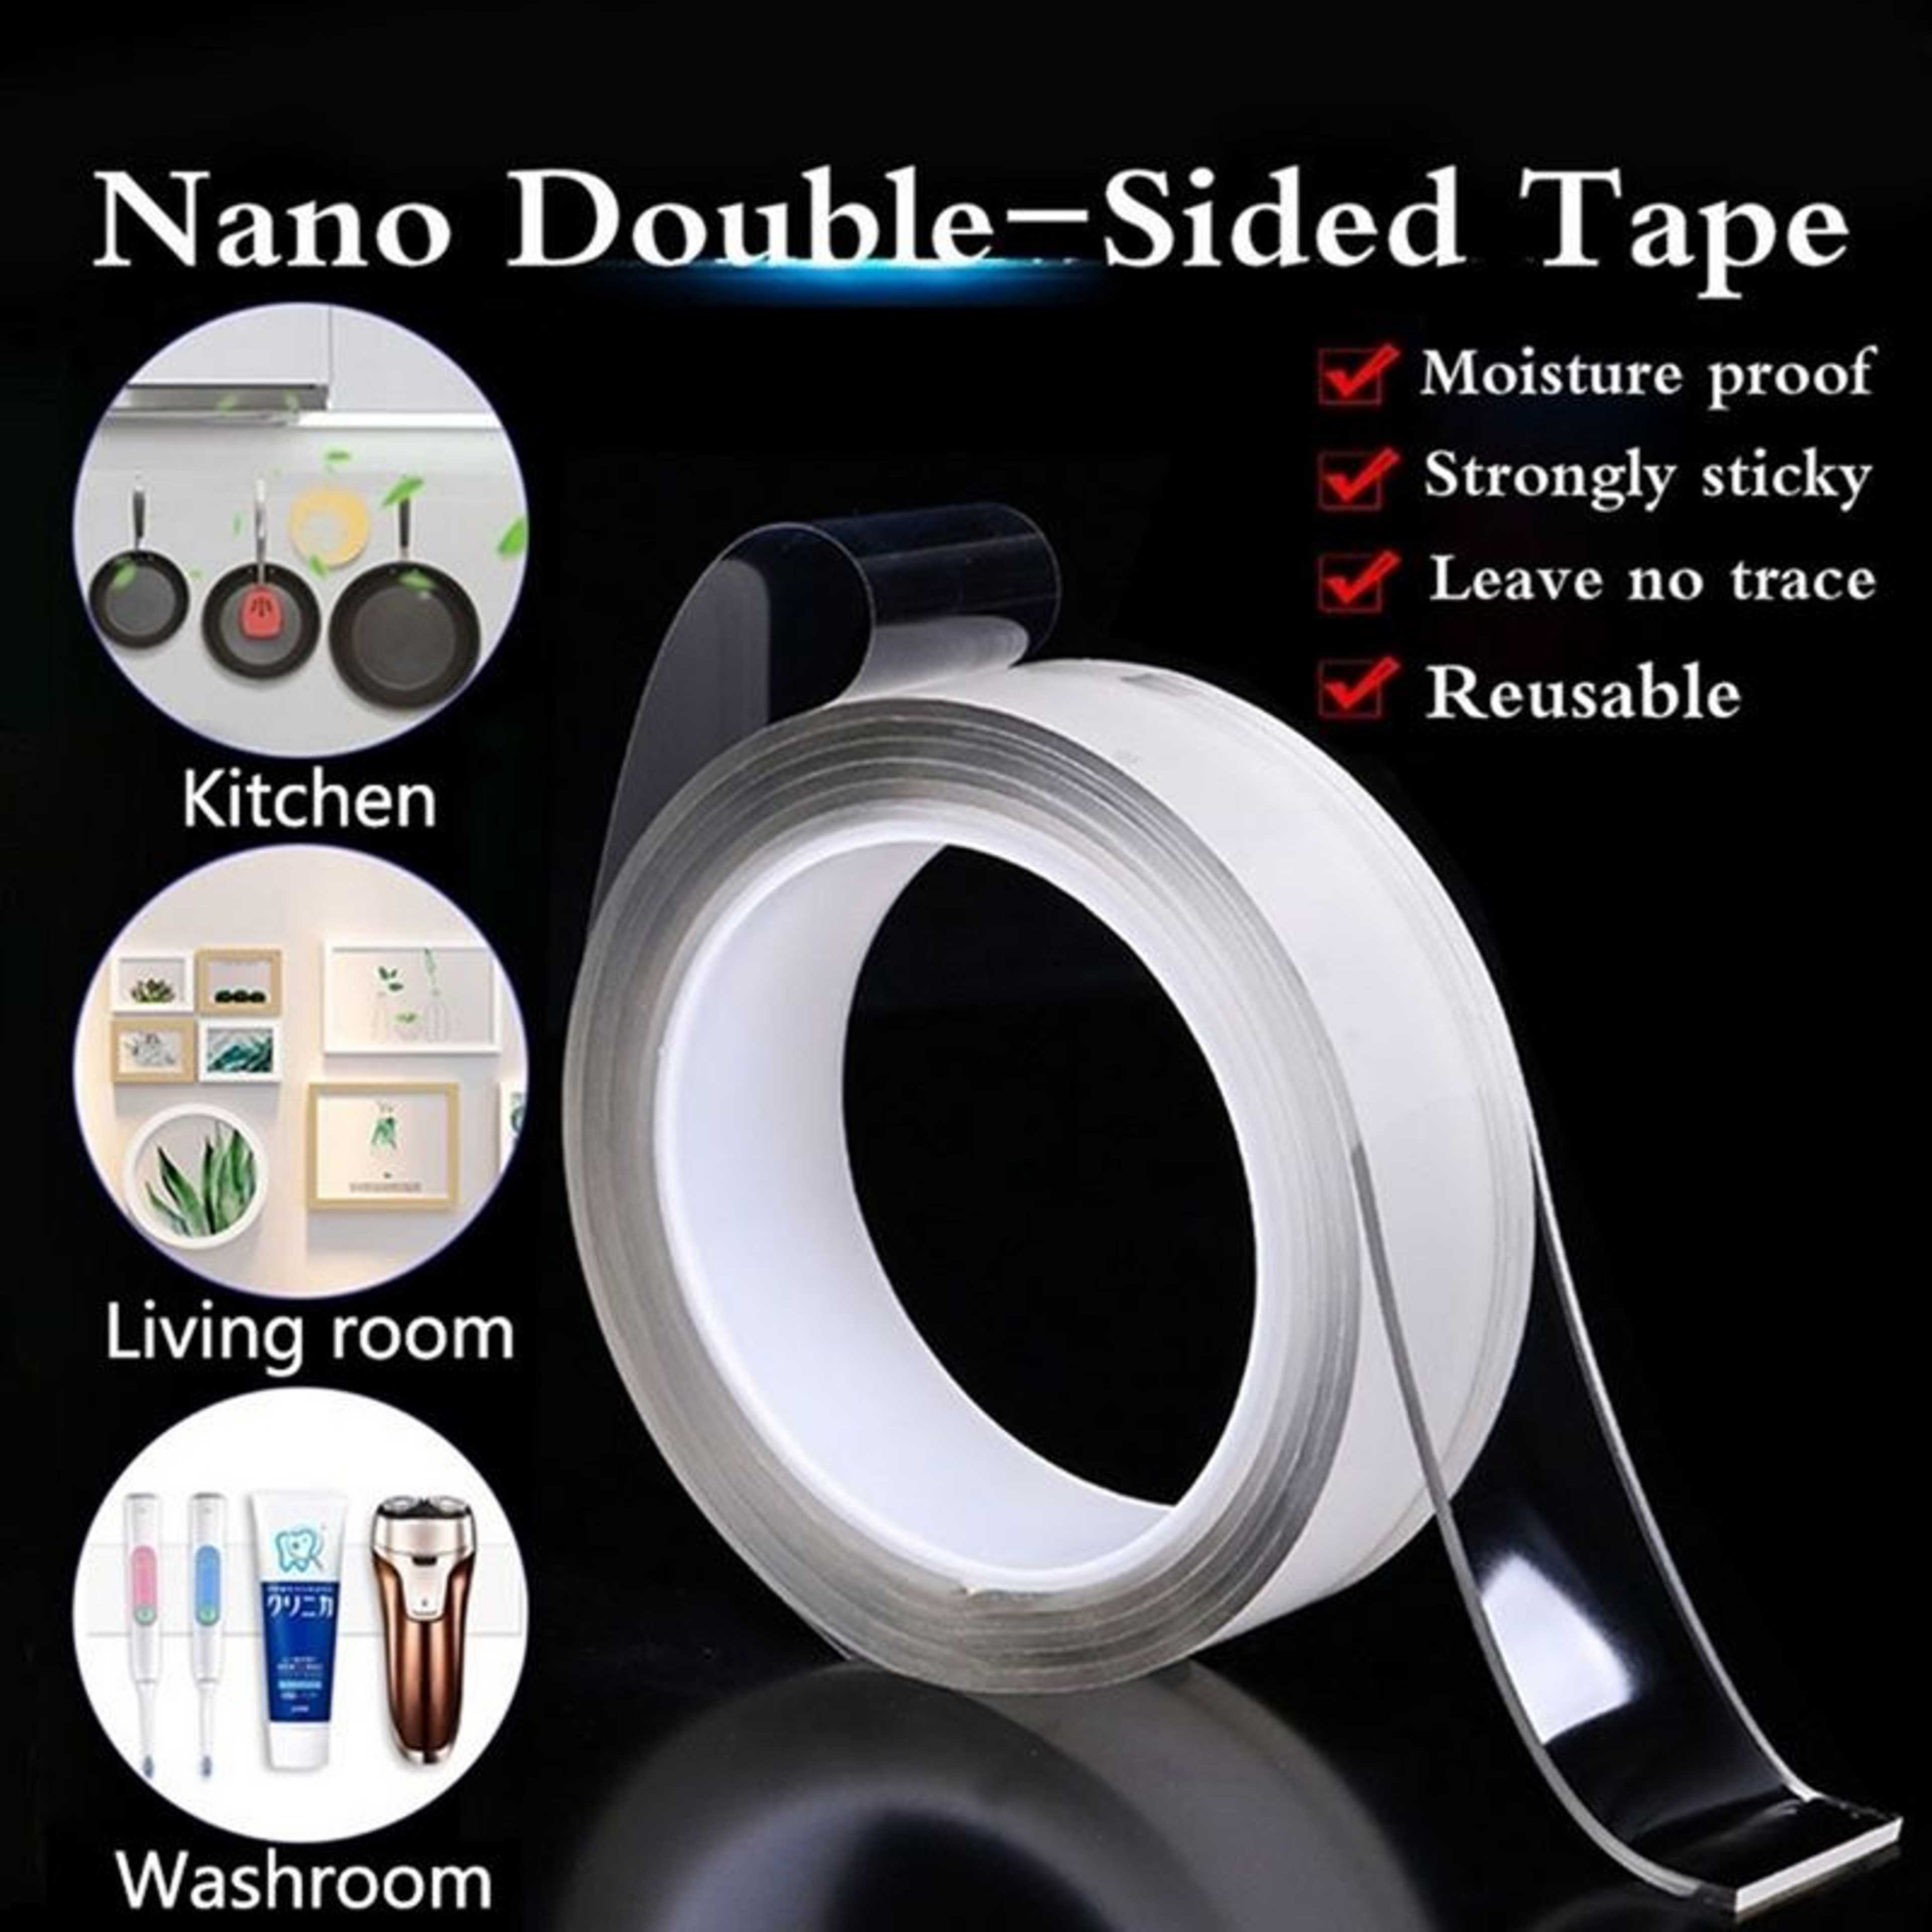 Magic Tape Double sided Tape Invisible Tape Nano Tape